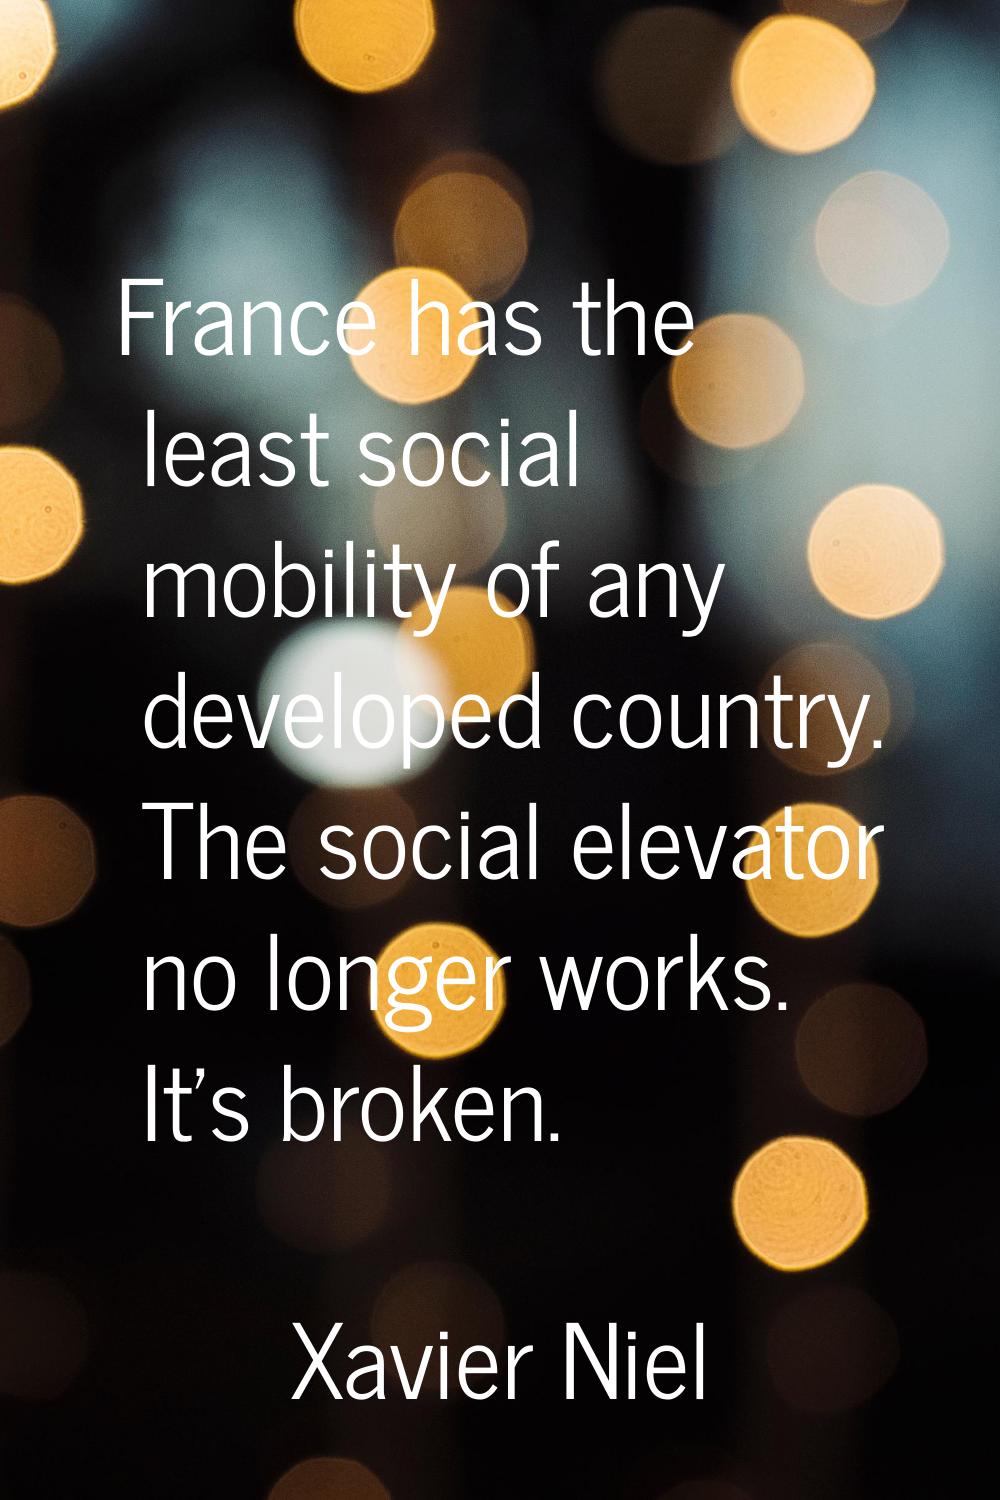 France has the least social mobility of any developed country. The social elevator no longer works.